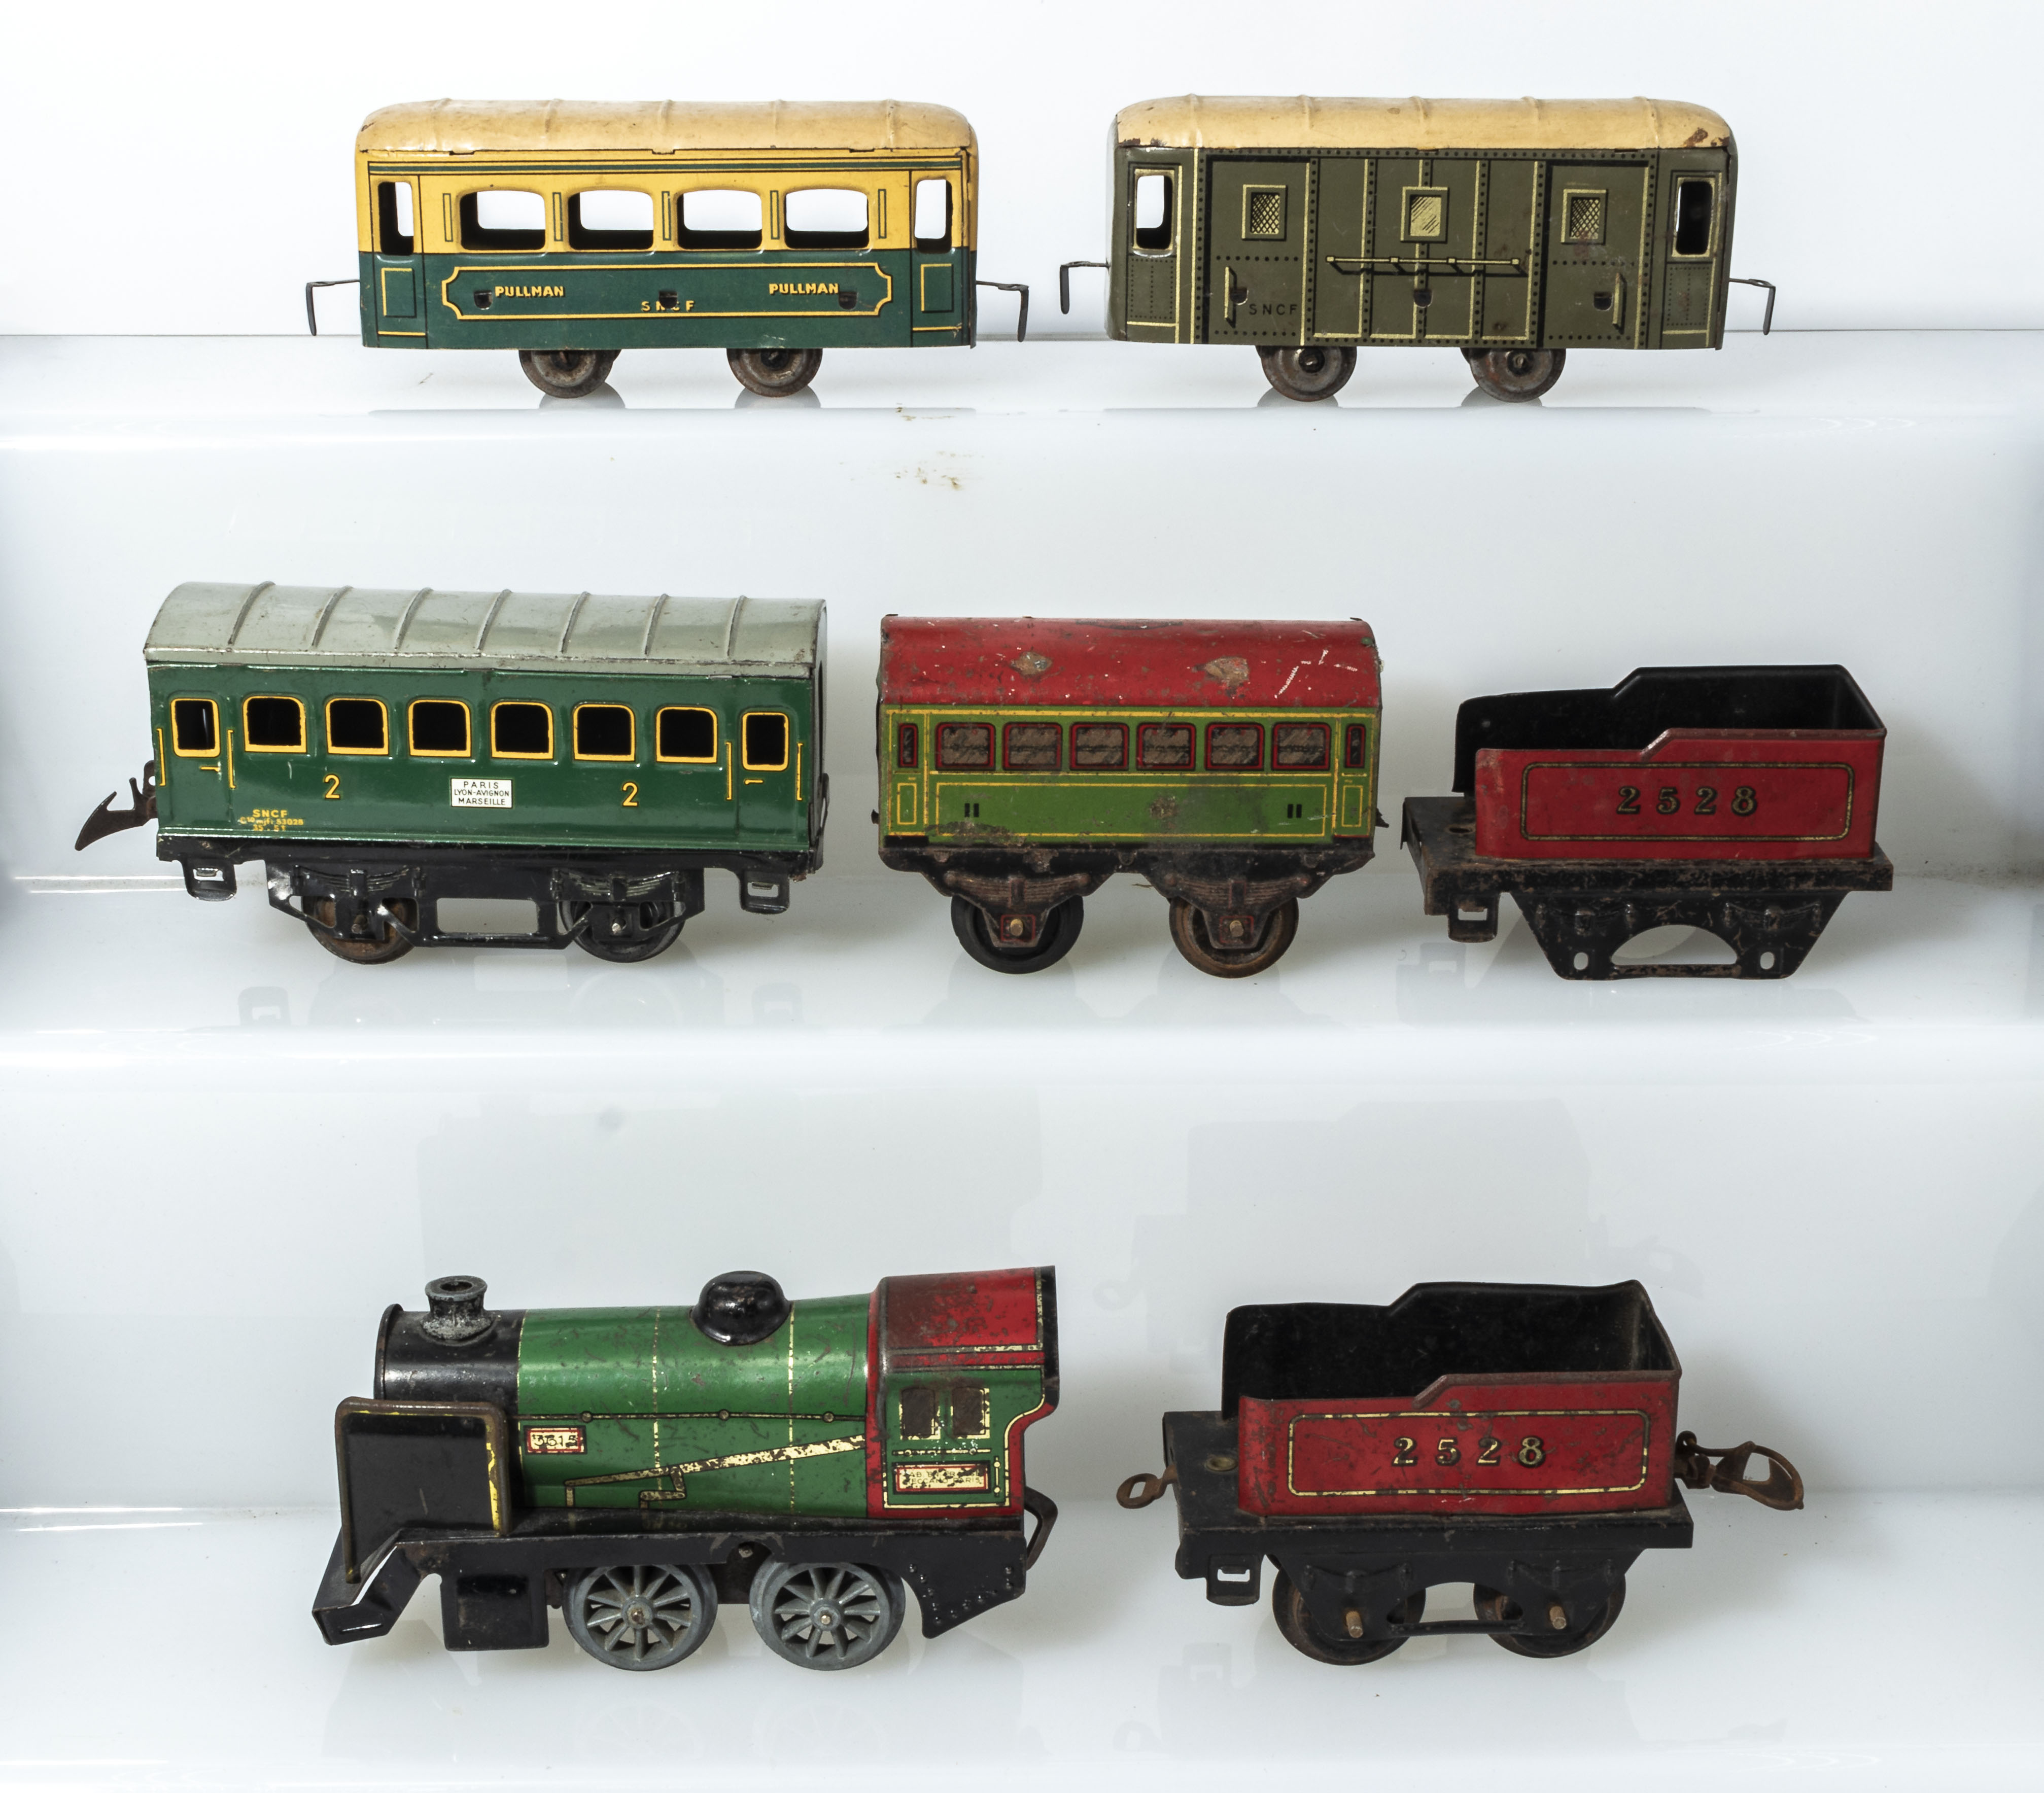 French Hornby clockwork engine 3615 together with two tenders, passenger car and three other small